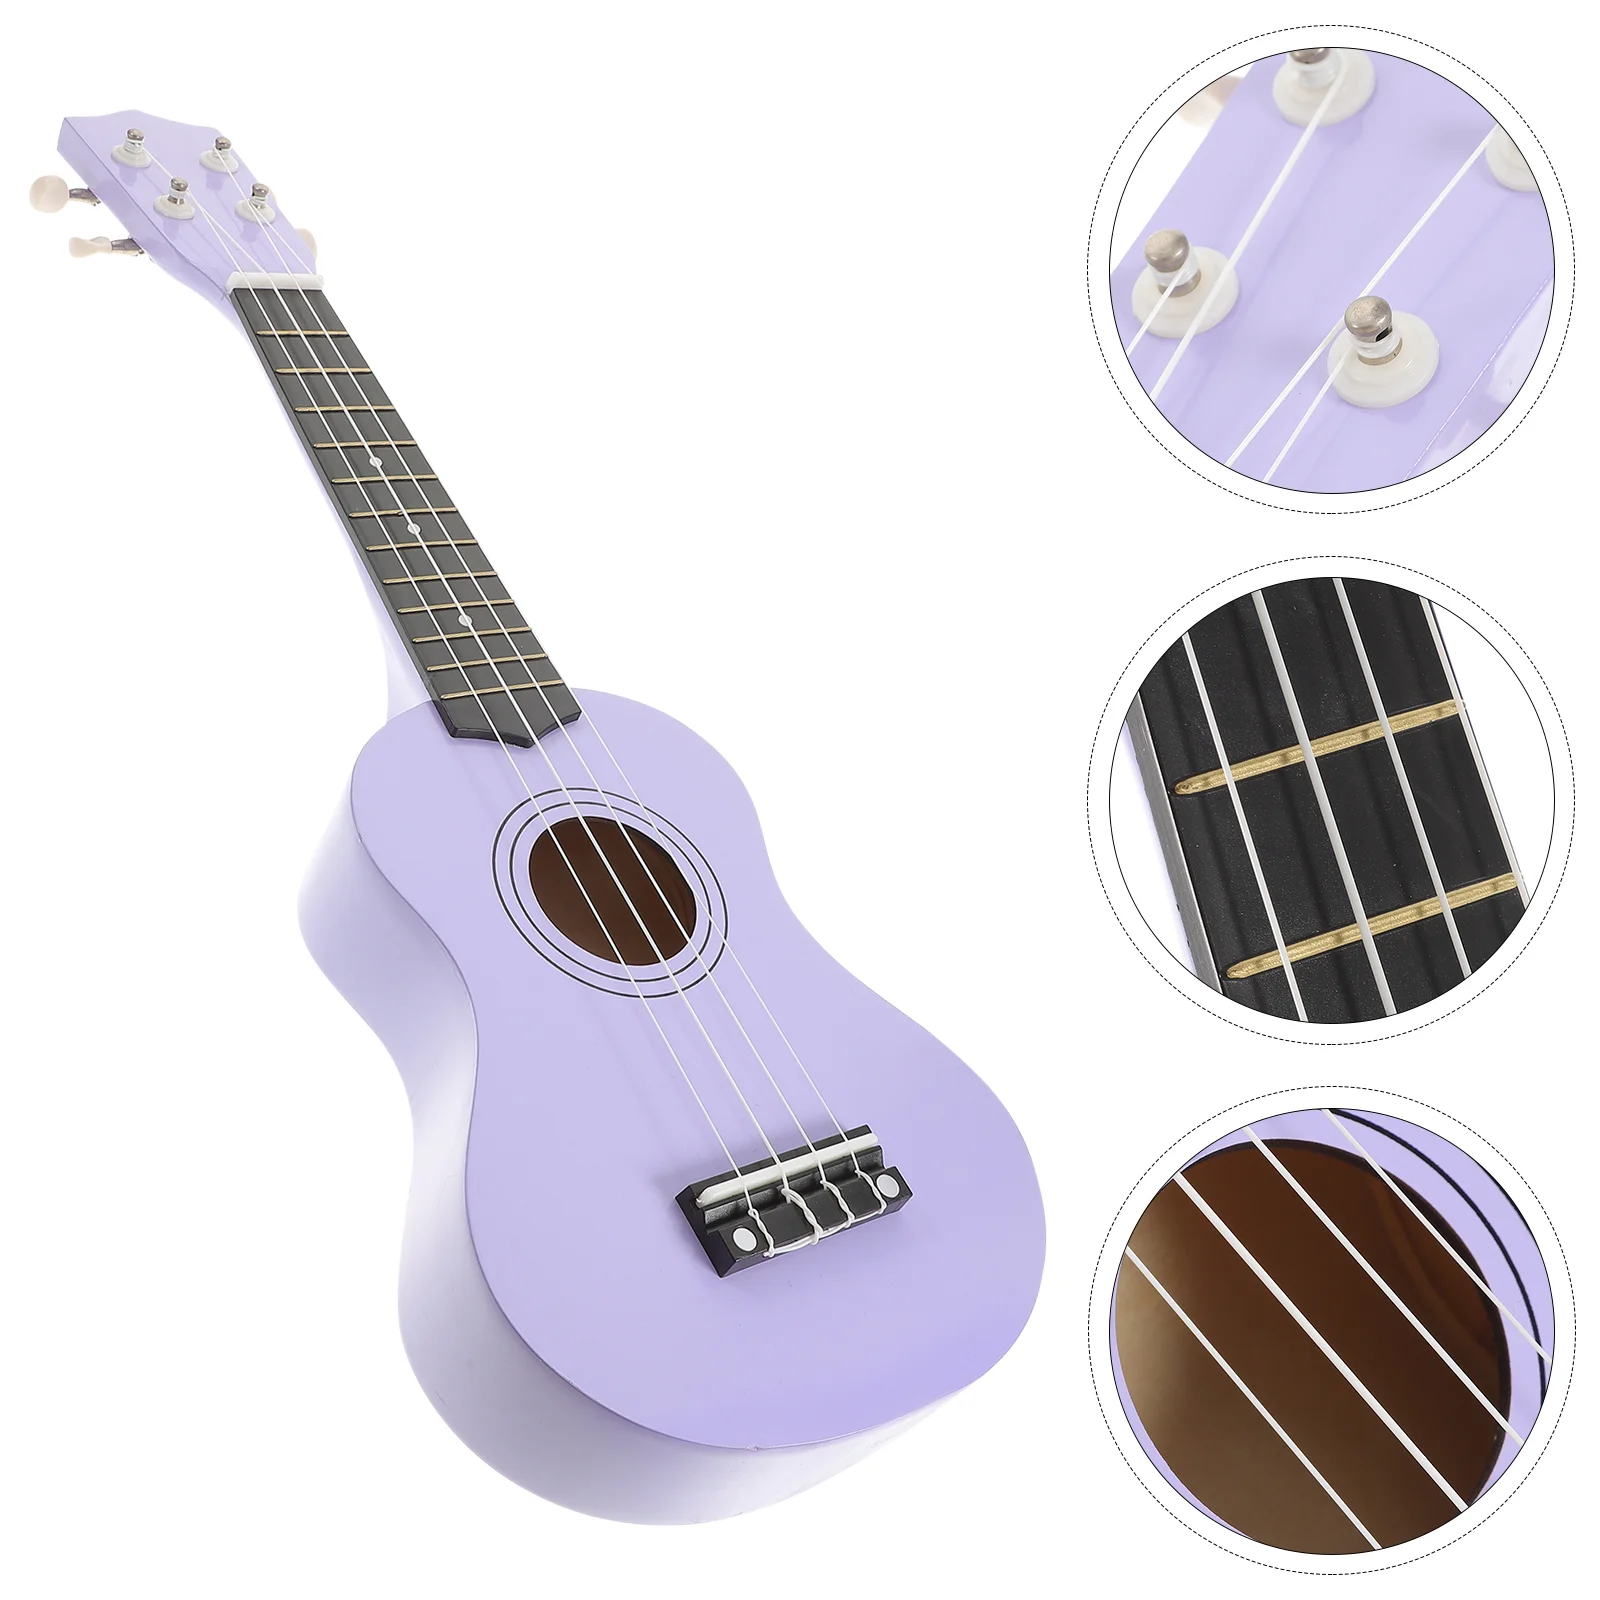 

Inches Ukulele Guitar Toy Wooden Ukulele Guitar Toy Funny Solid Wood Musical Instruments Model Toy Early Educational Toy